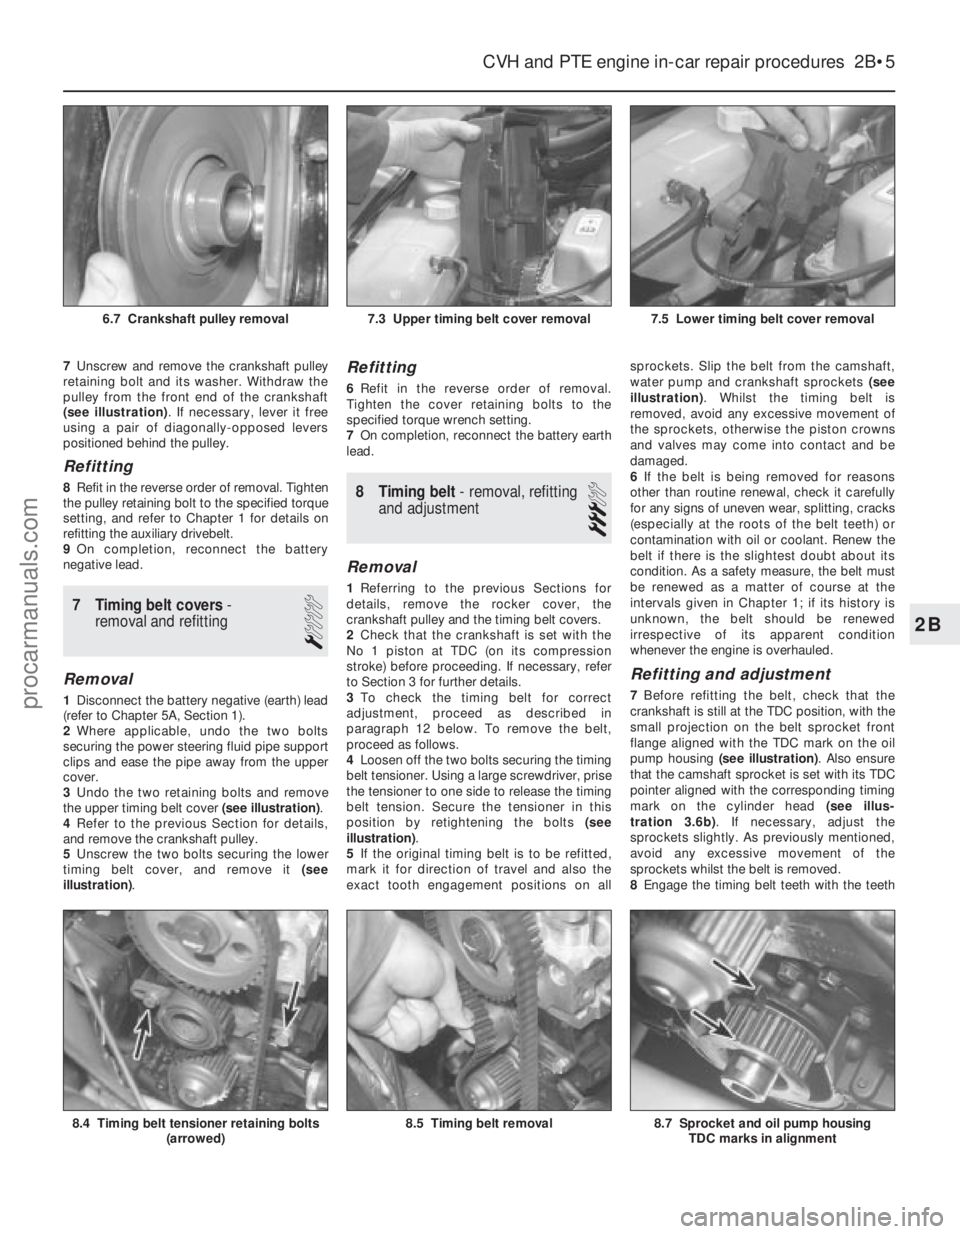 FORD FIESTA 1989  Service Repair Manual 7Unscrew and remove the crankshaft pulley
retaining bolt and its washer. Withdraw the
pulley from the front end of the crankshaft
(see illustration) . If necessary, lever it free
using a pair of diago